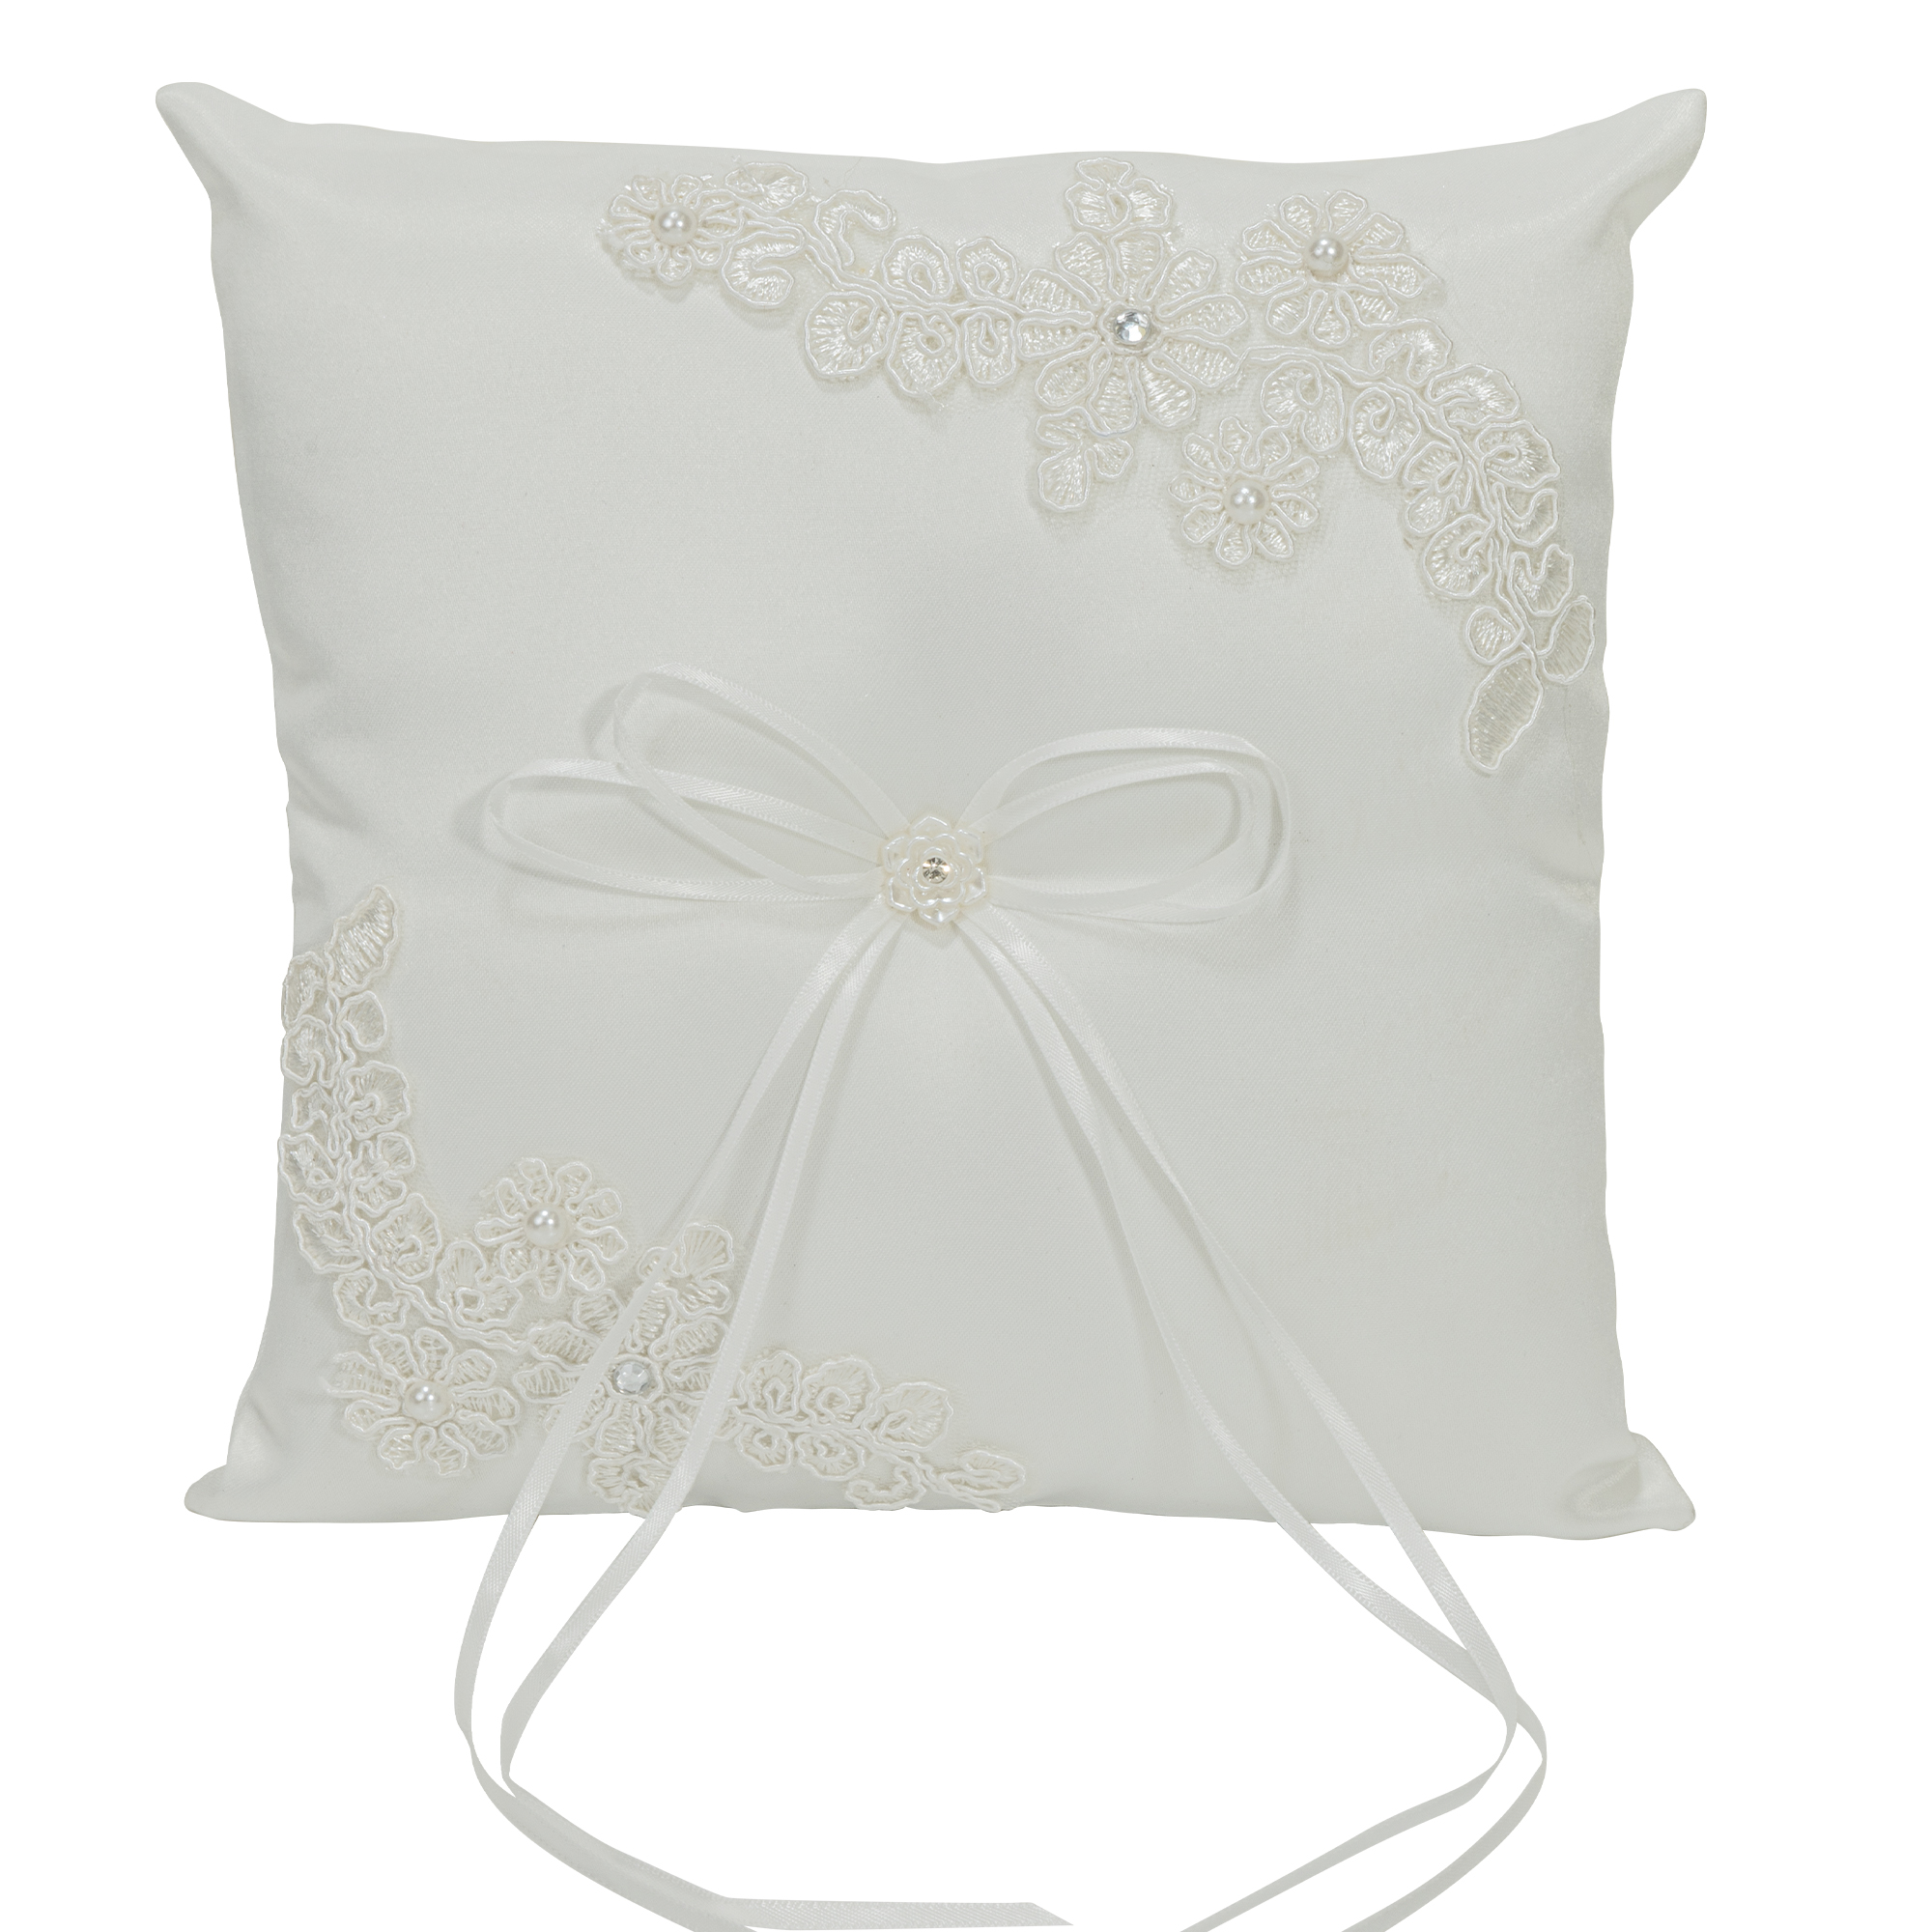 Wedding Pillow with Rhinestone Accent - White